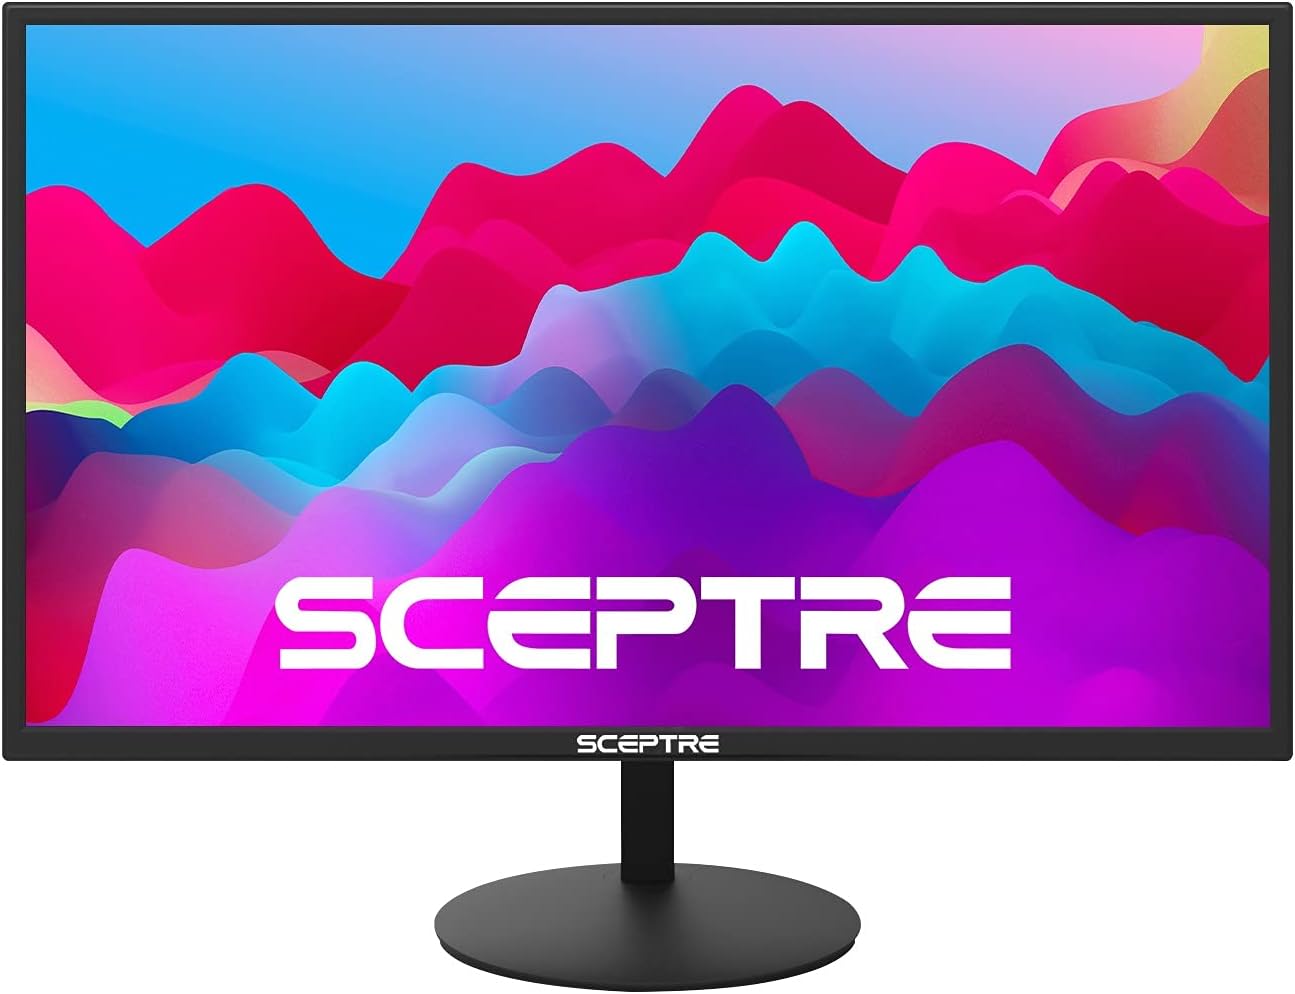 Sceptre 27-Inch FHD LED Gaming Monitor 75Hz 2X HDMI [...]